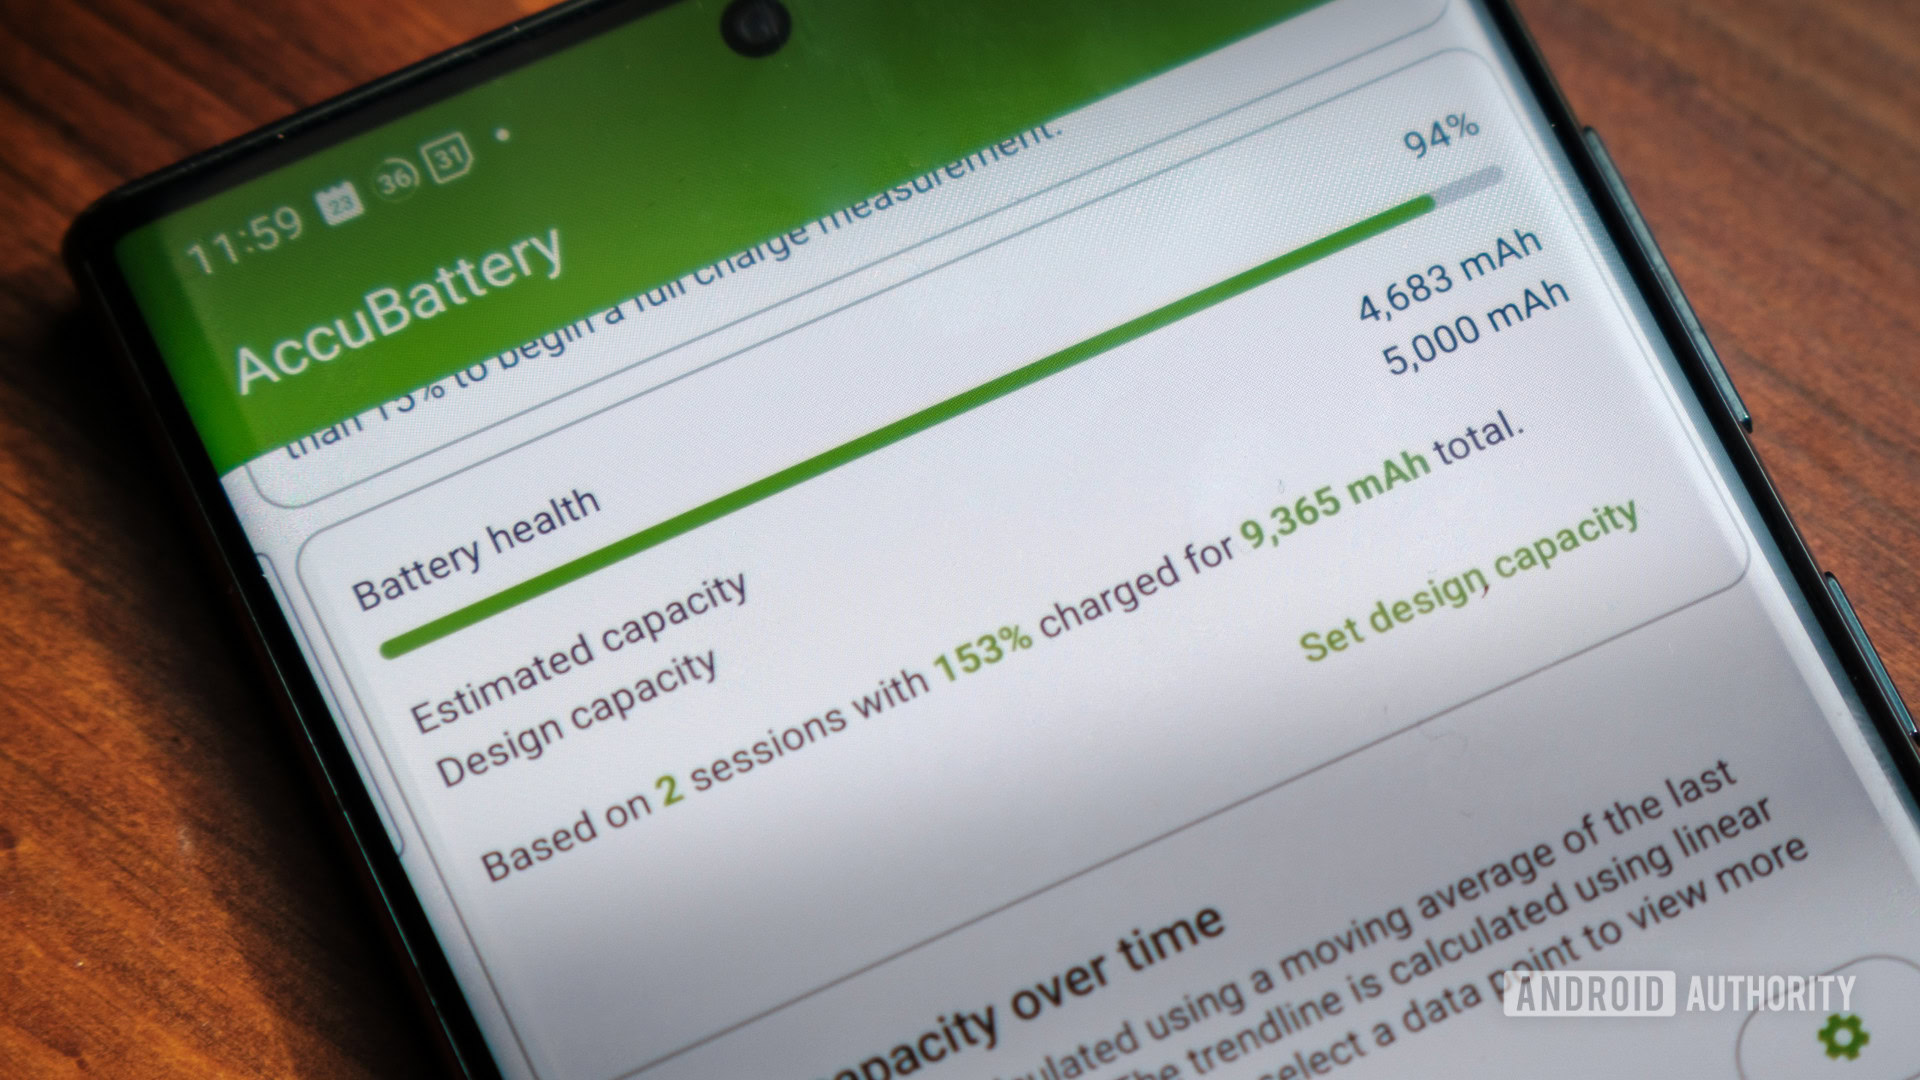 The best Android apps to check Android battery health